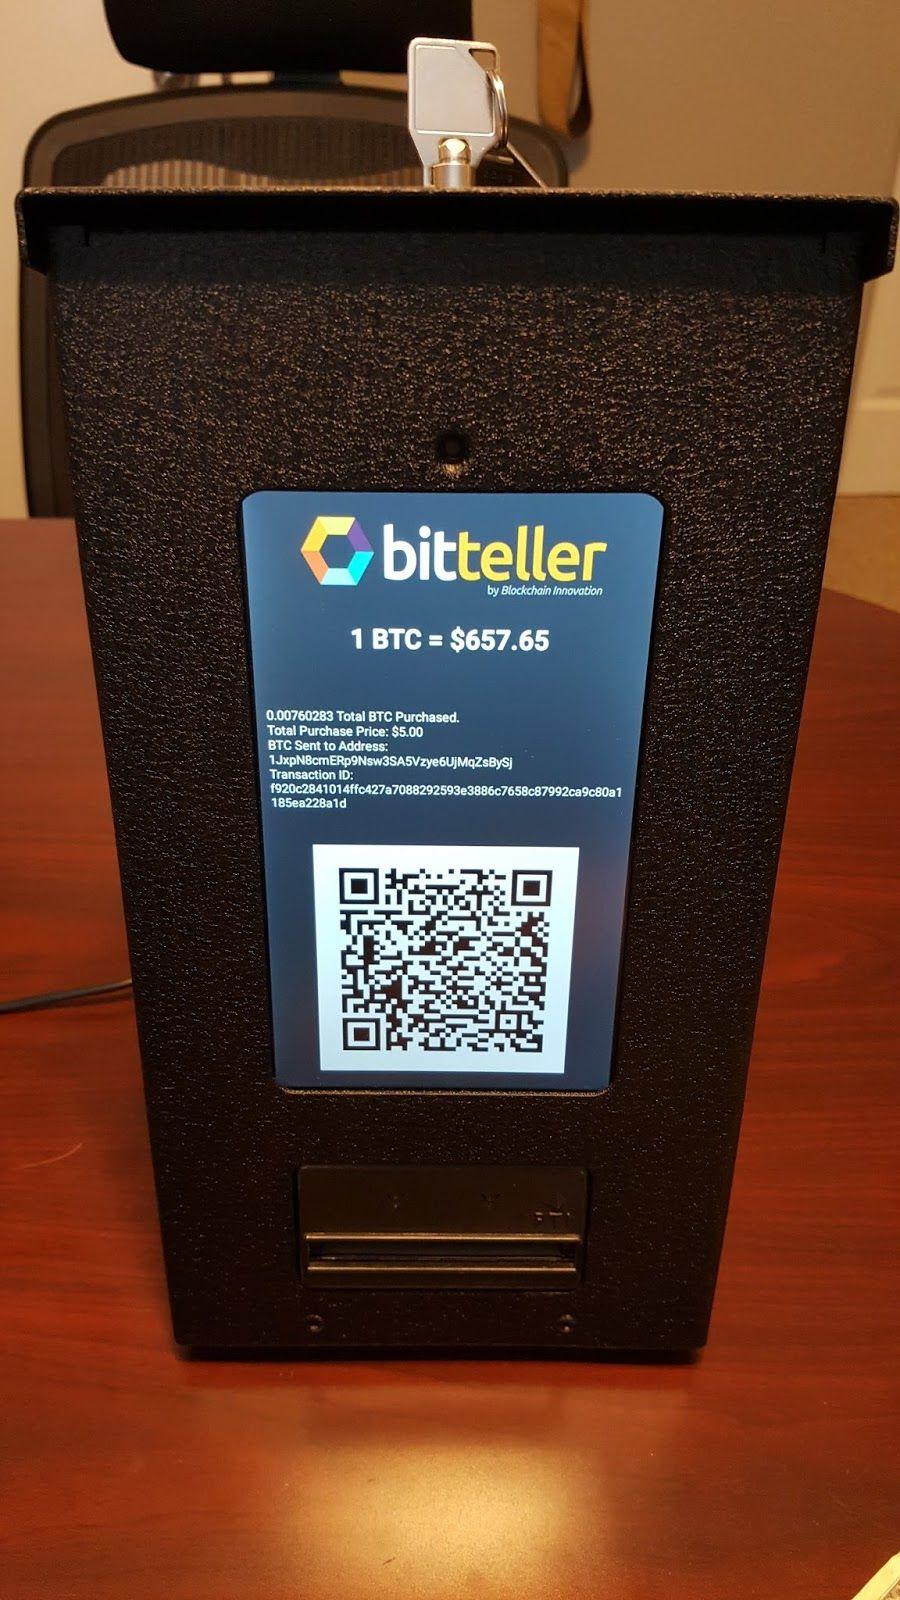 A QR code and your transaction details will then be displayed for you to scan, and verify the transaction has been completed. Where can I buy bitcoin for my bitteller system?